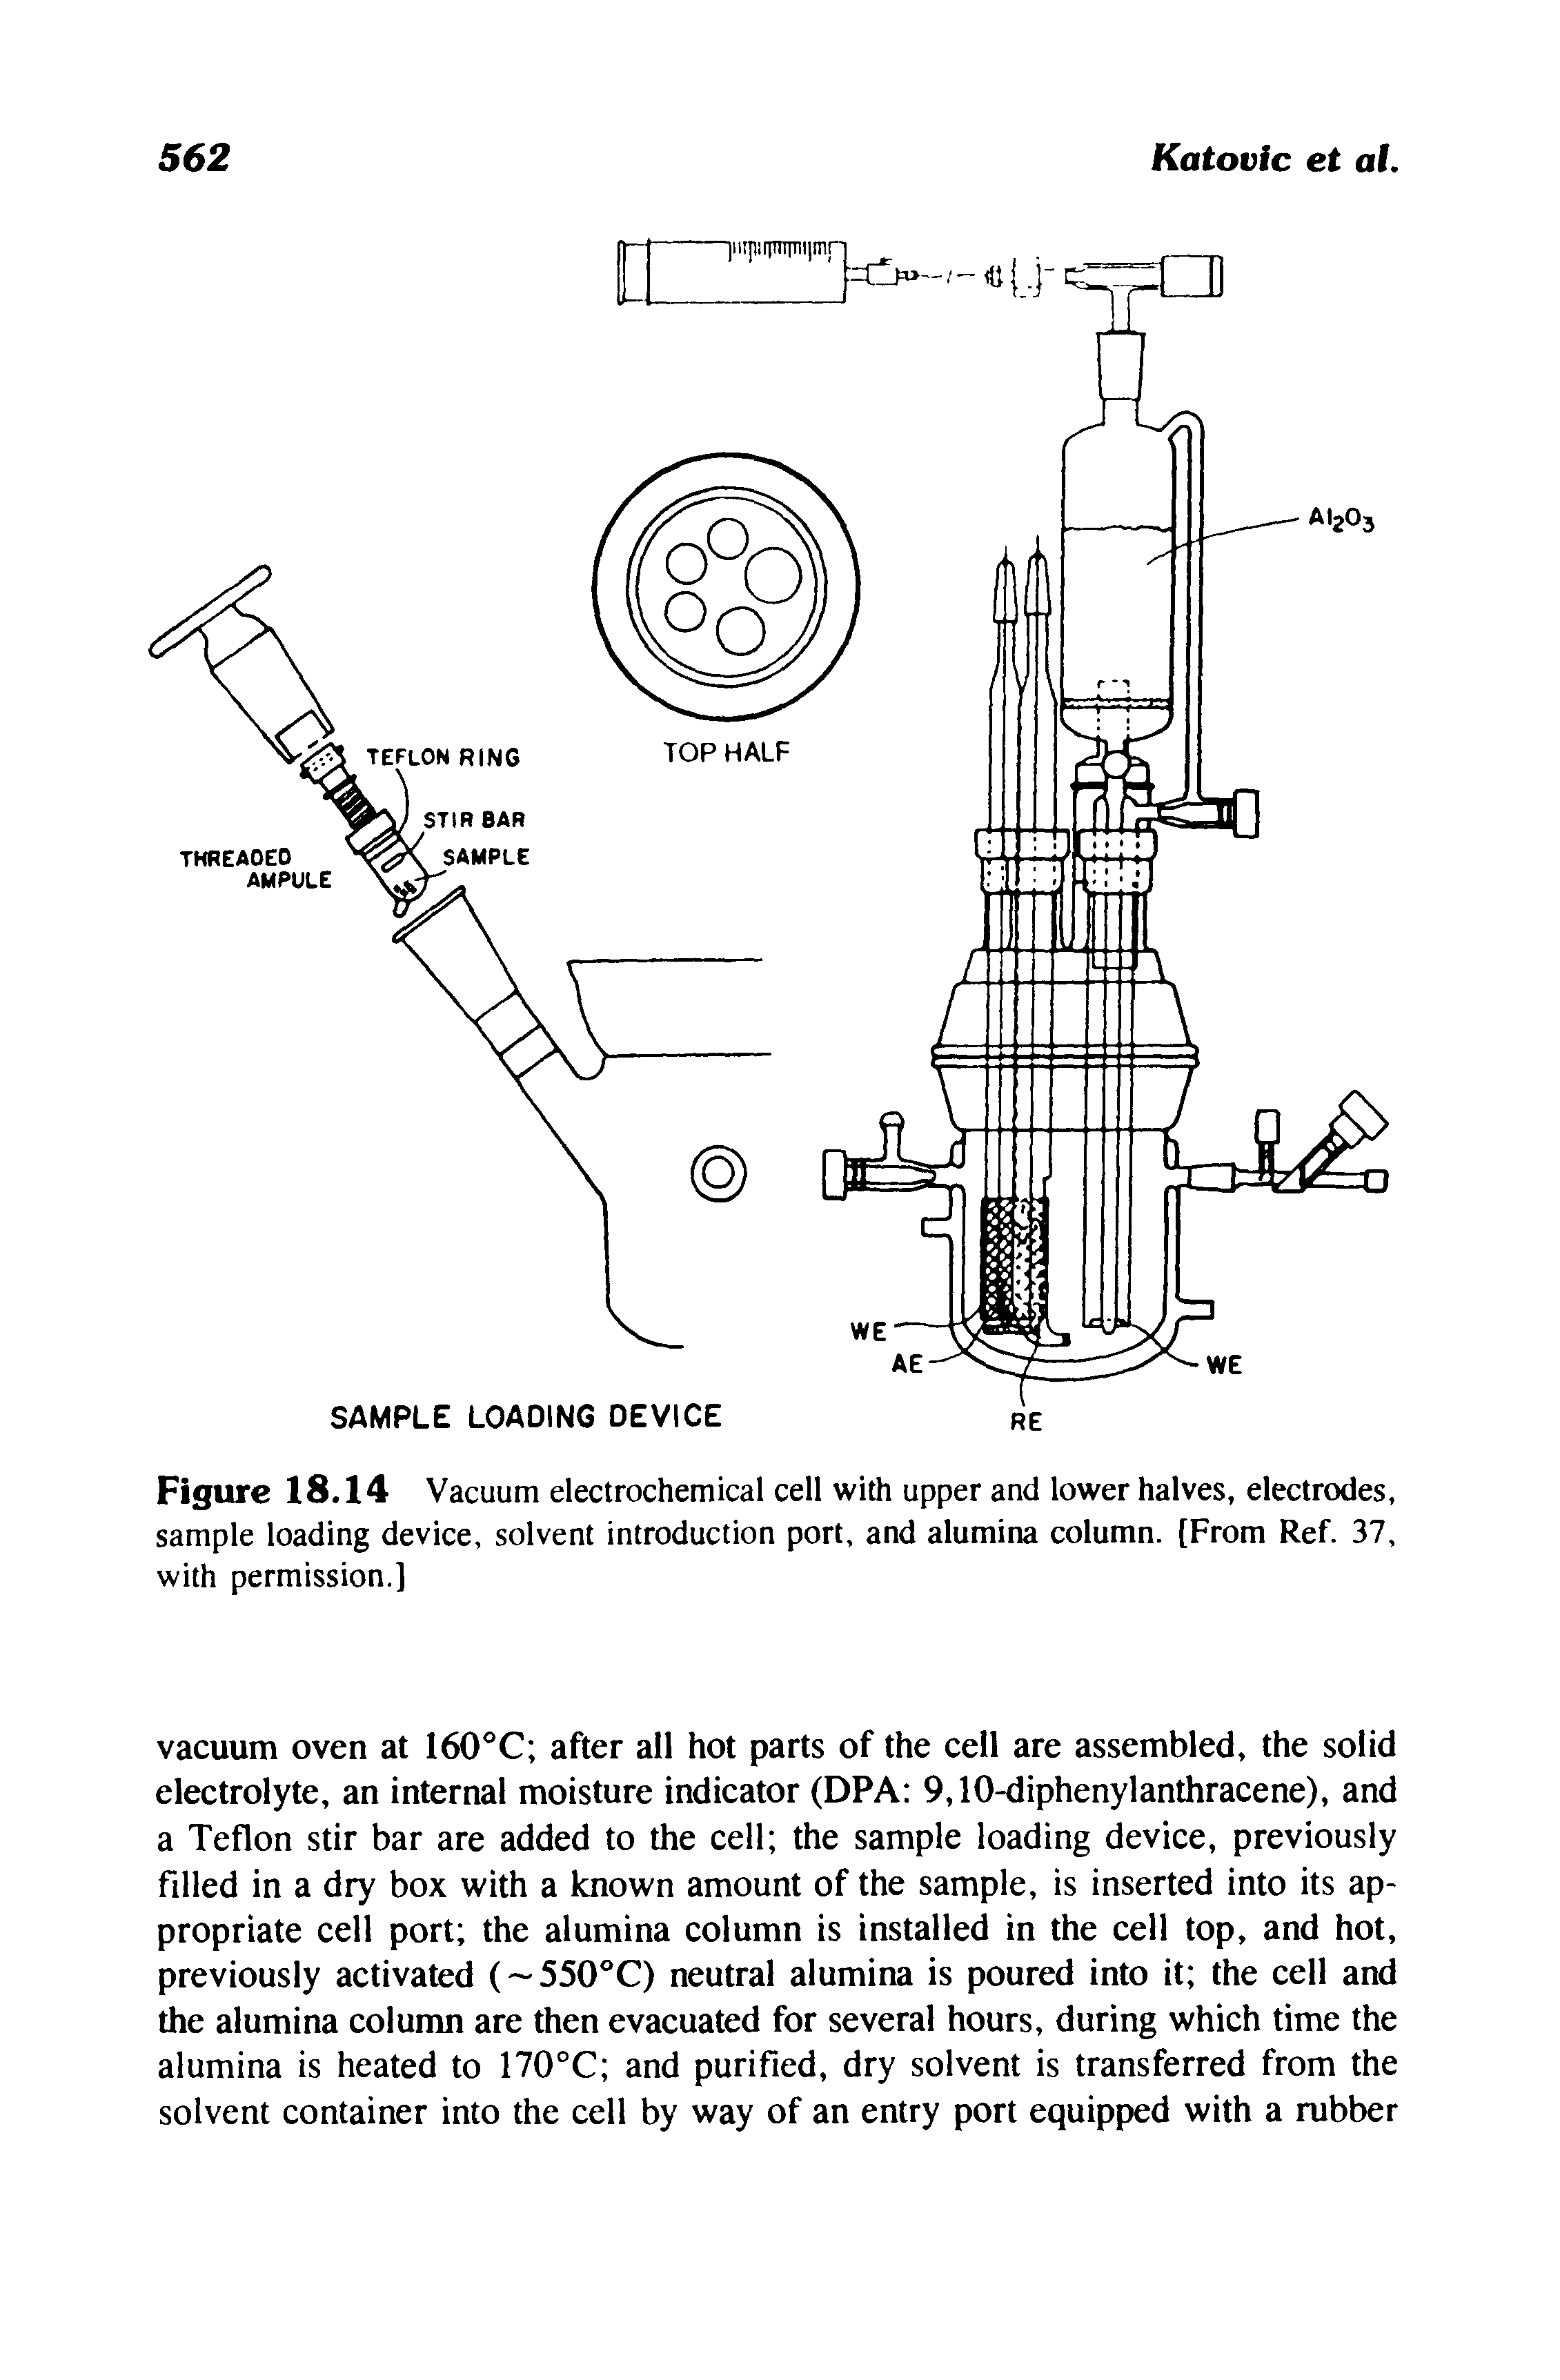 Figure 18.14 Vacuum electrochemical cell with upper and lower halves, electrodes, sample loading device, solvent introduction port, and alumina column. [From Ref. 37, with permission.]...